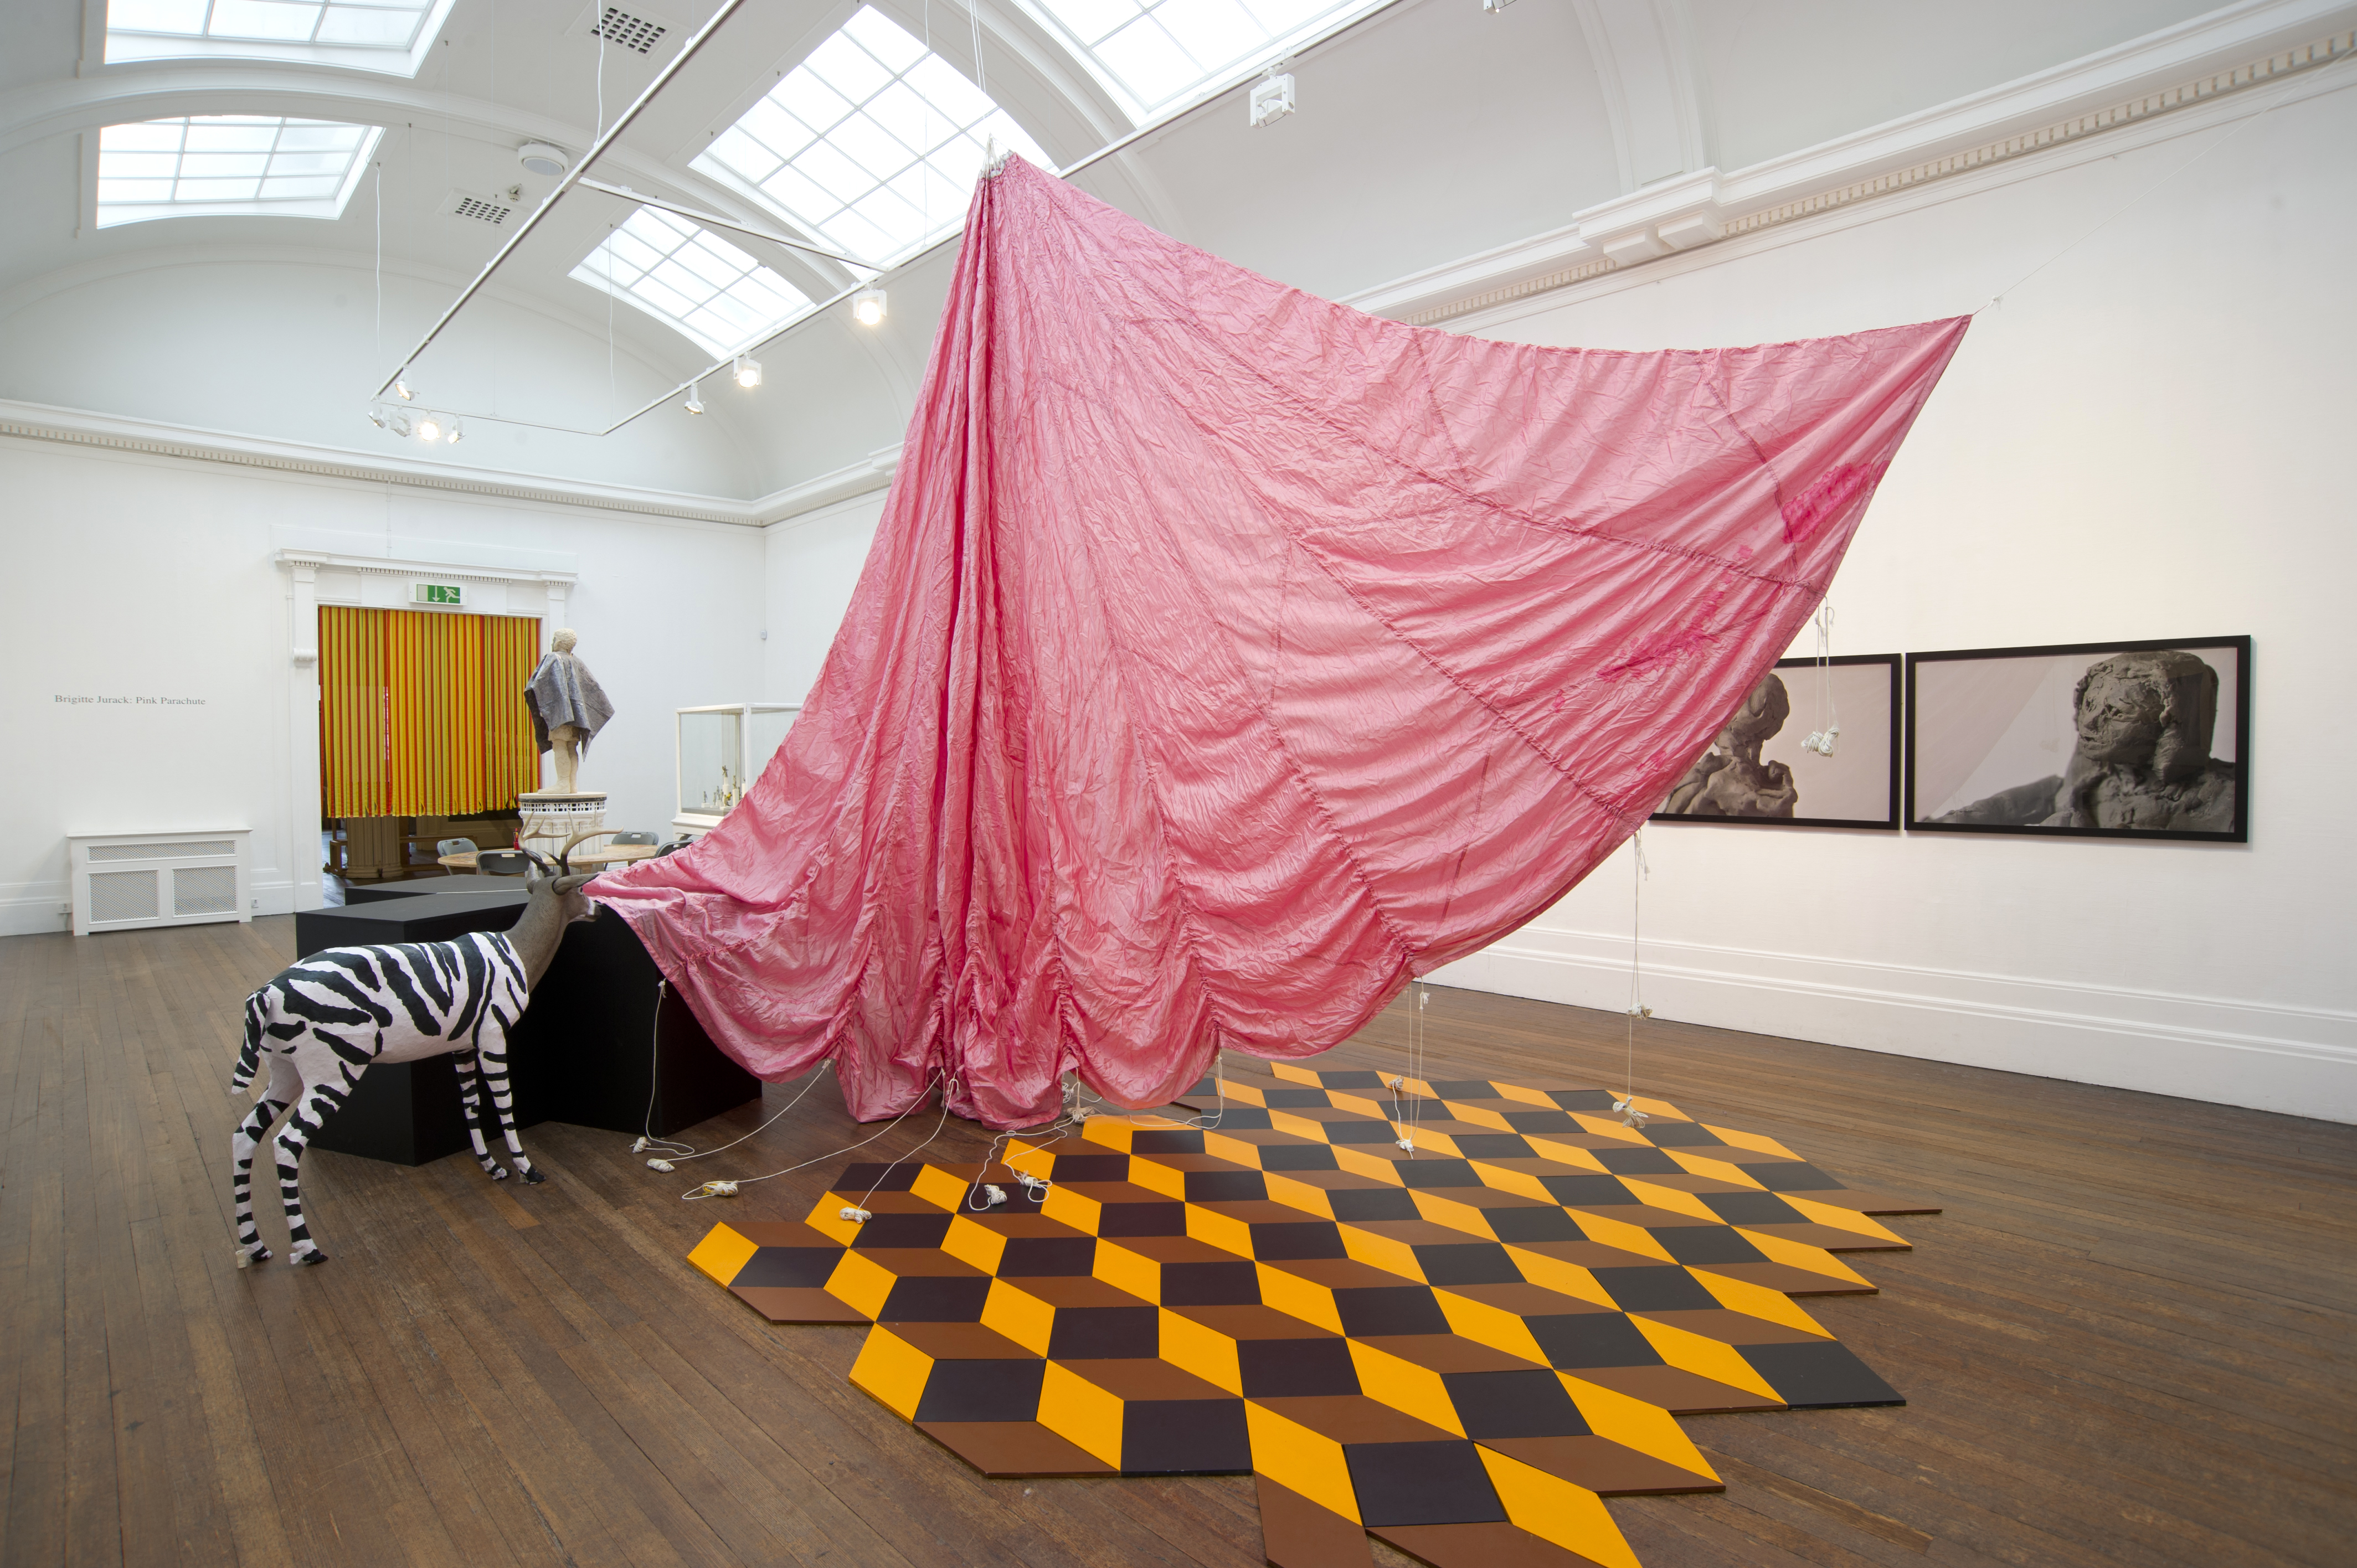 Various artworks, objects include large pink parachute, tessellated flooring, a stuffed goat/zebra hybrid, tasseled door curtain and photographs of clay faces. Included in the exhibition Brigitte Jurack: Pink Parachute.